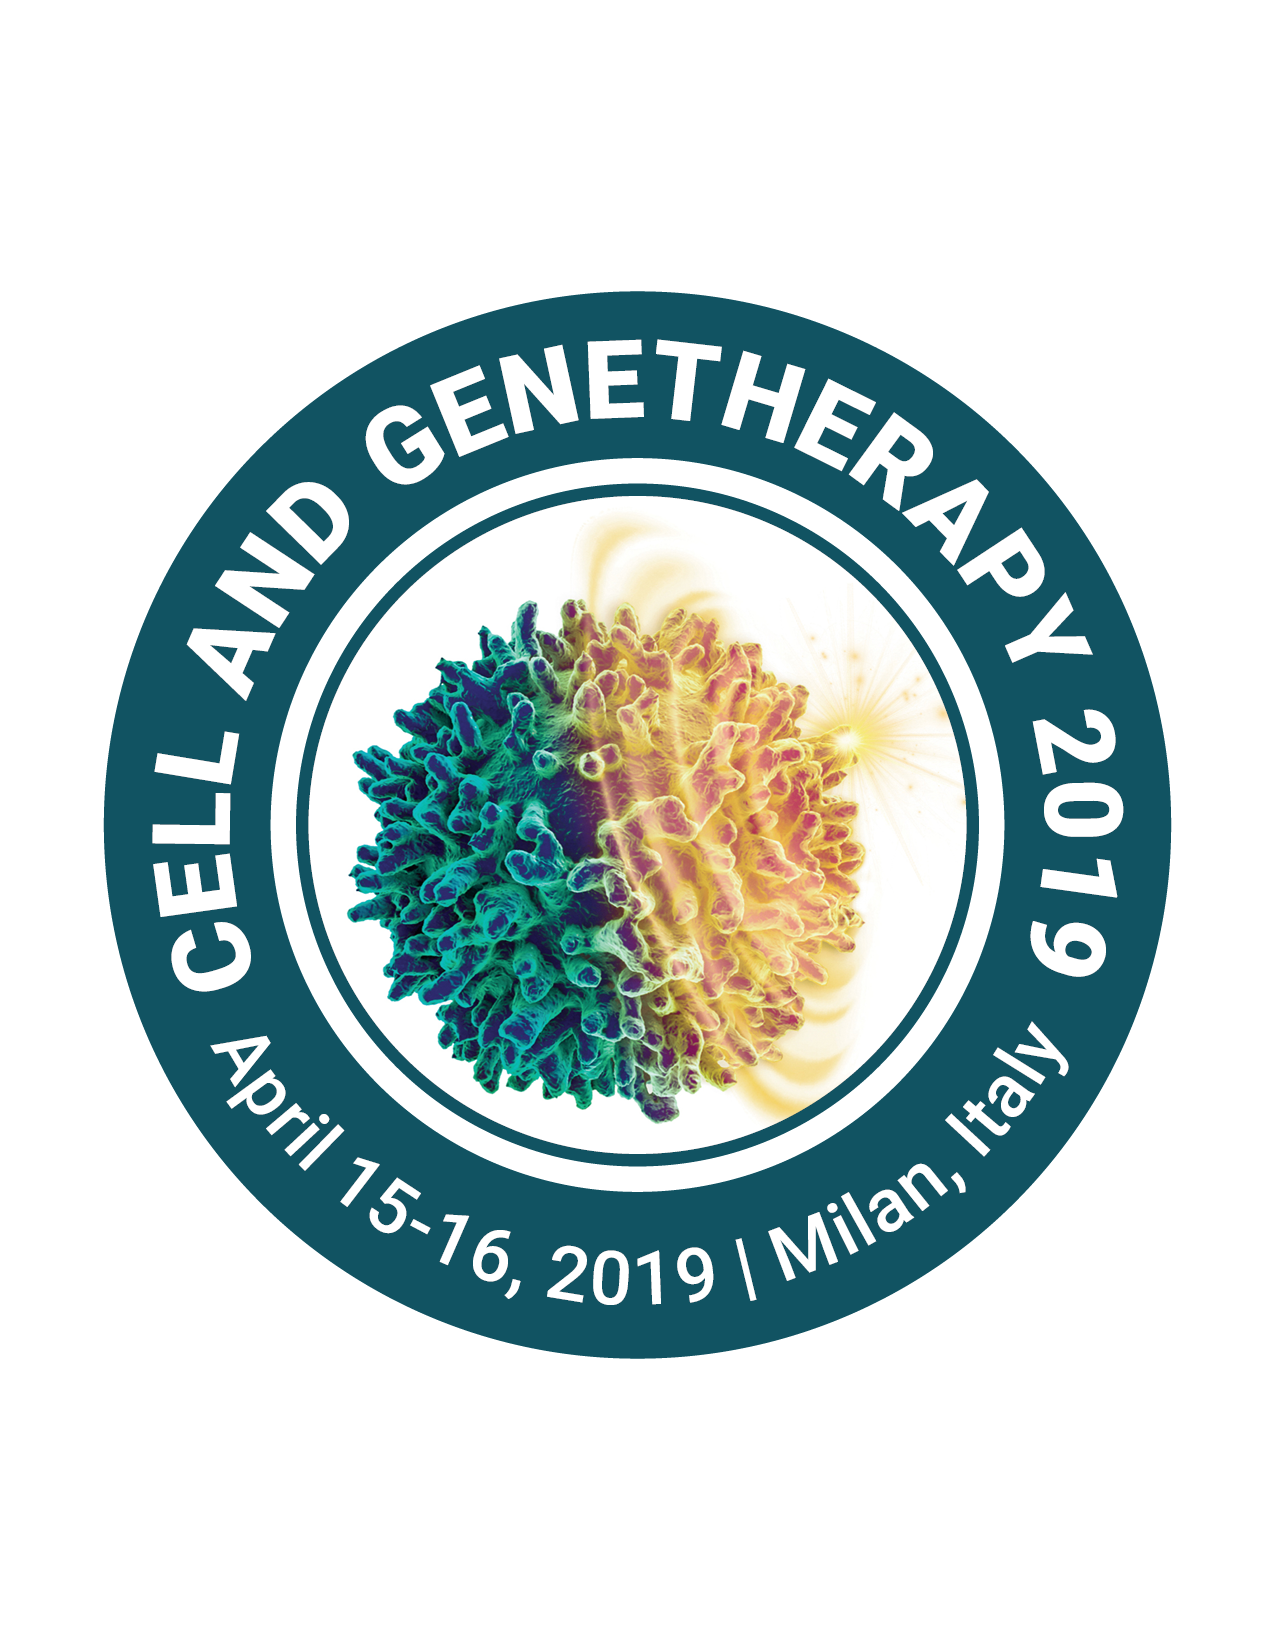 2nd International Conference on Cell and Genetherapy